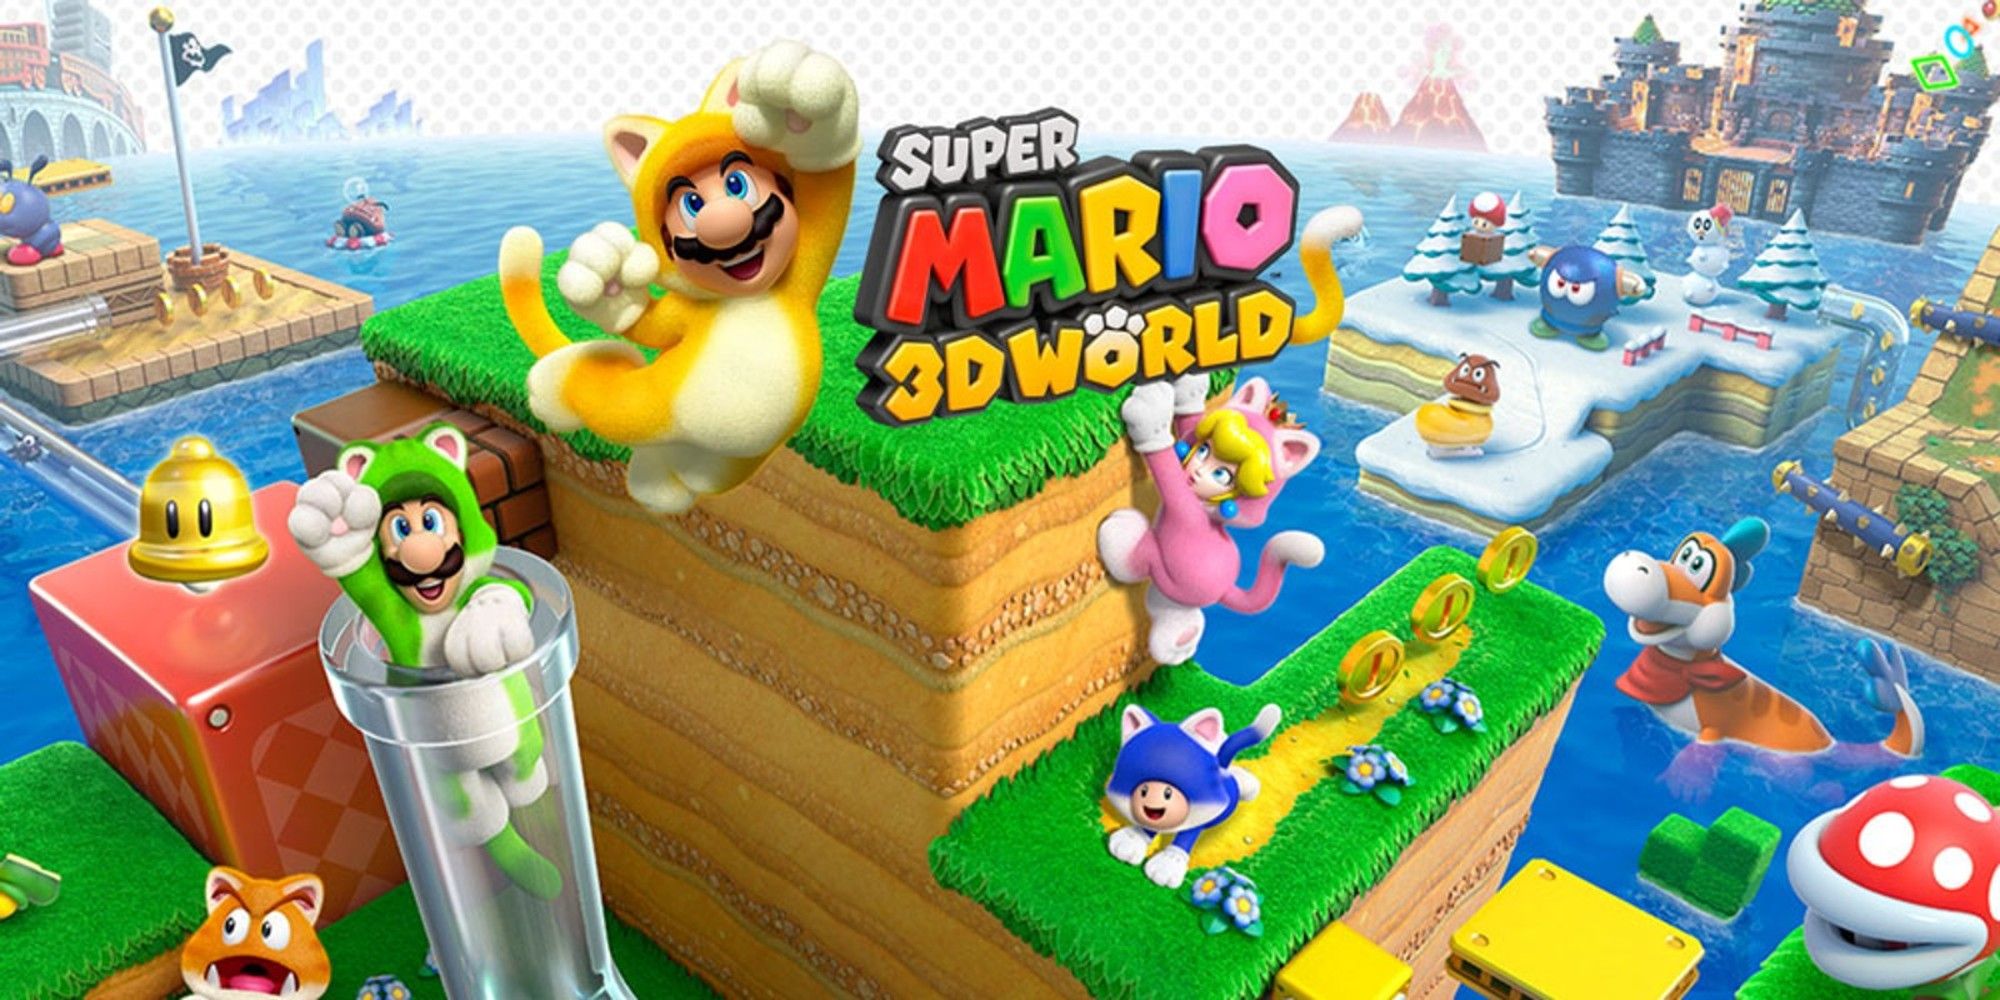 Promotional art for Super Mario 3D World, showing the main characters in different costumes on a backdrop of a level